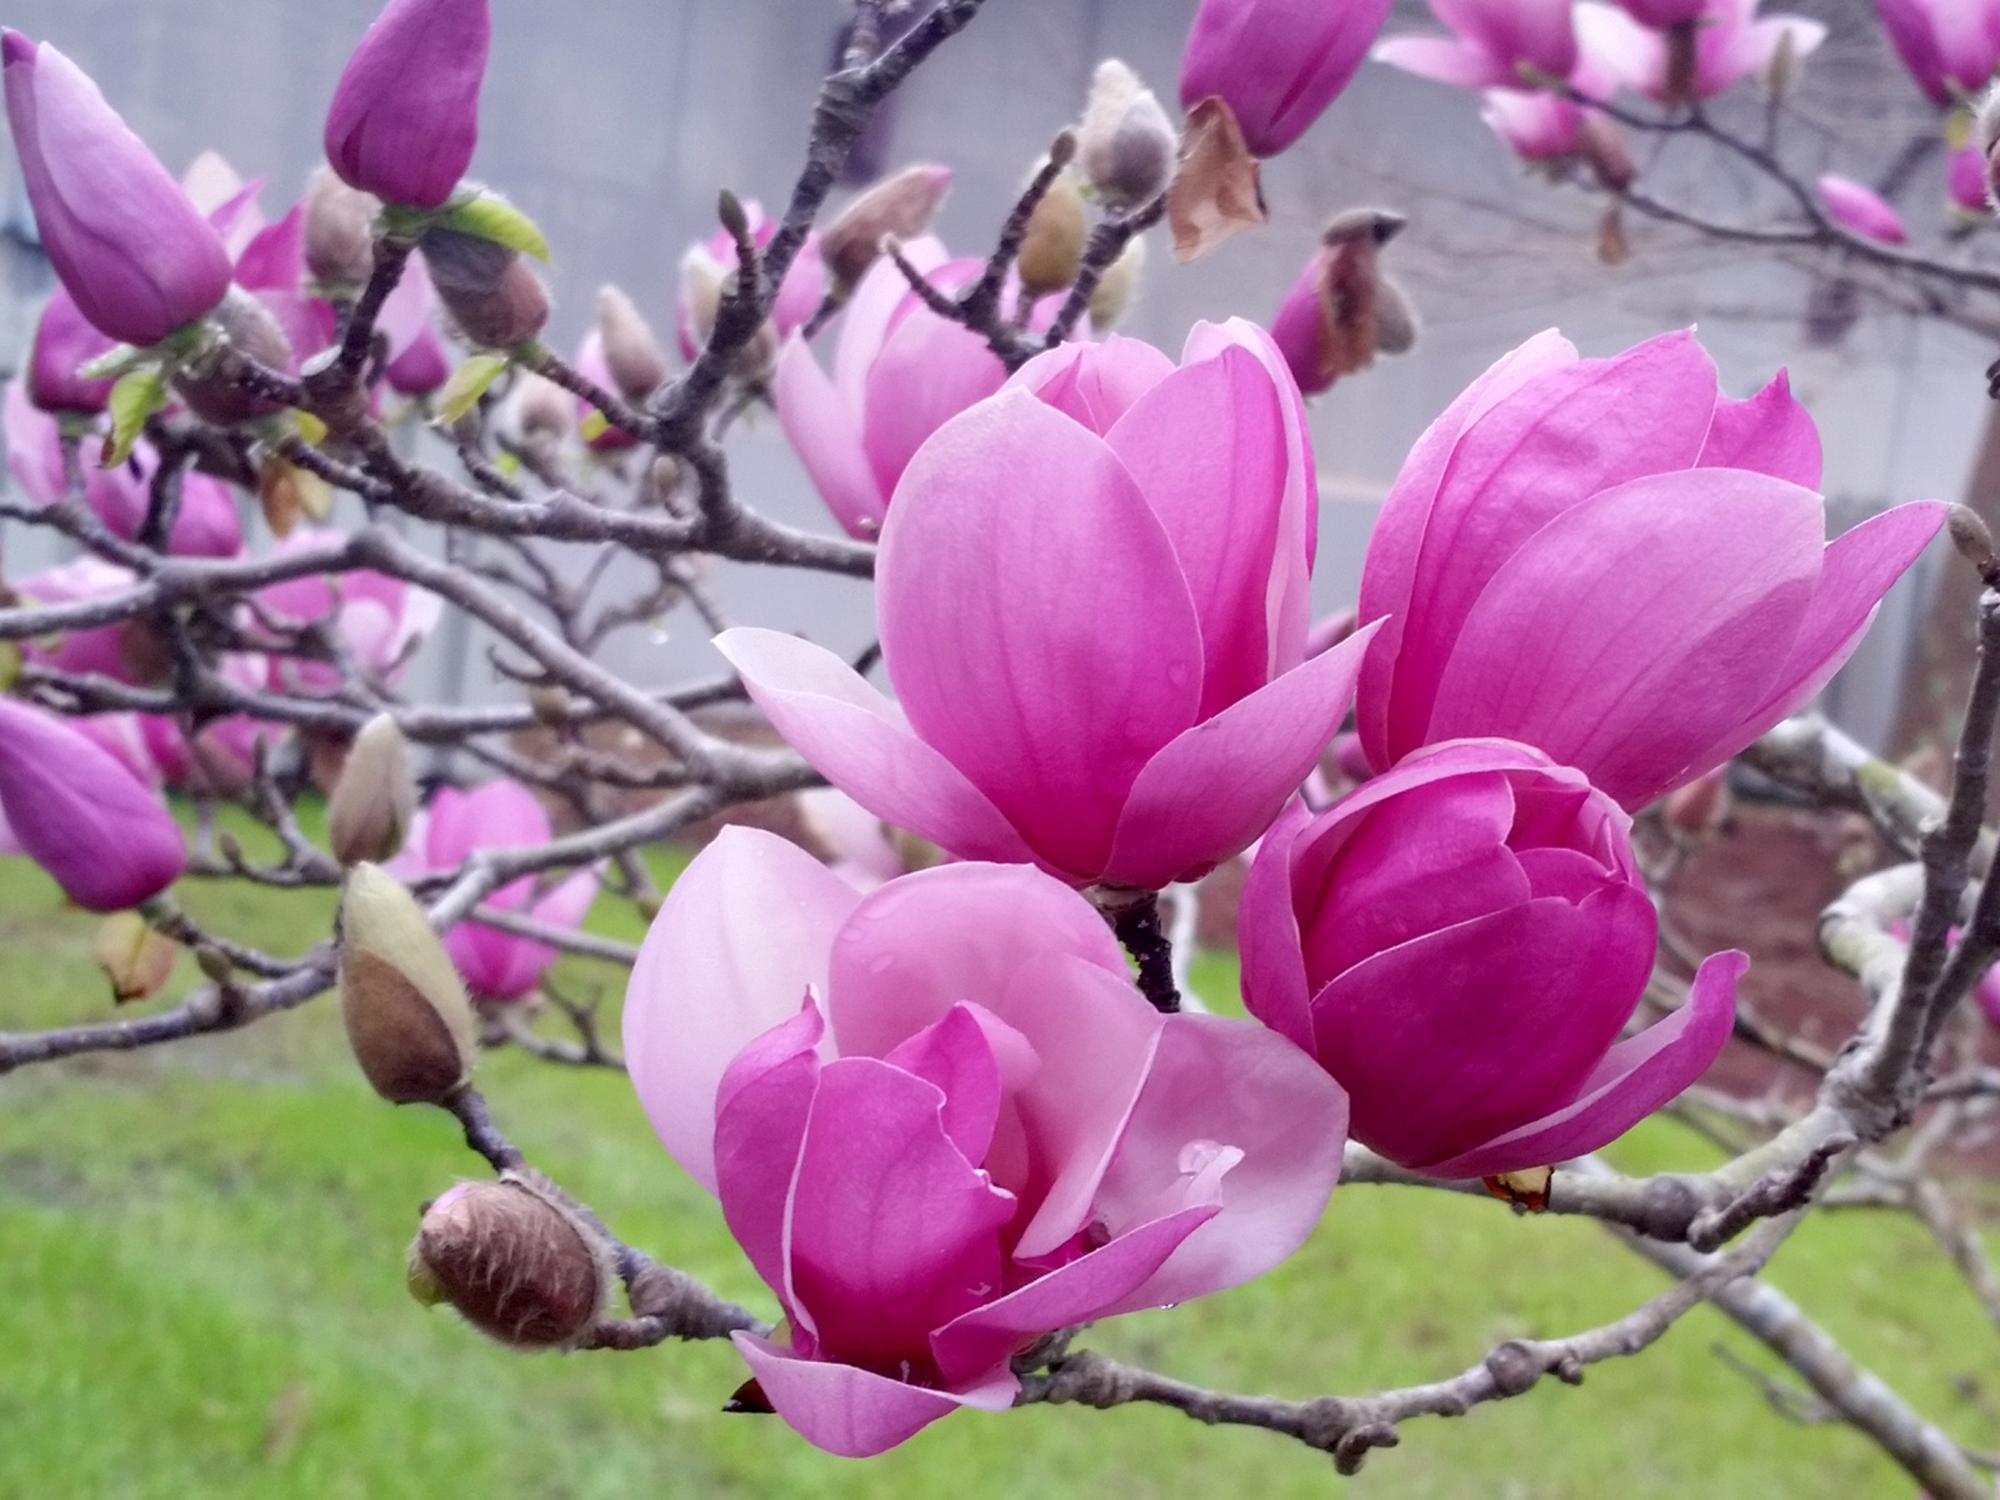 Saucer magnolias bloom before the leaves emerge with huge, white, pink or bold-purple flowers that reach up to 10 inches across. (Photo by MSU Extension/Gary Bachman)